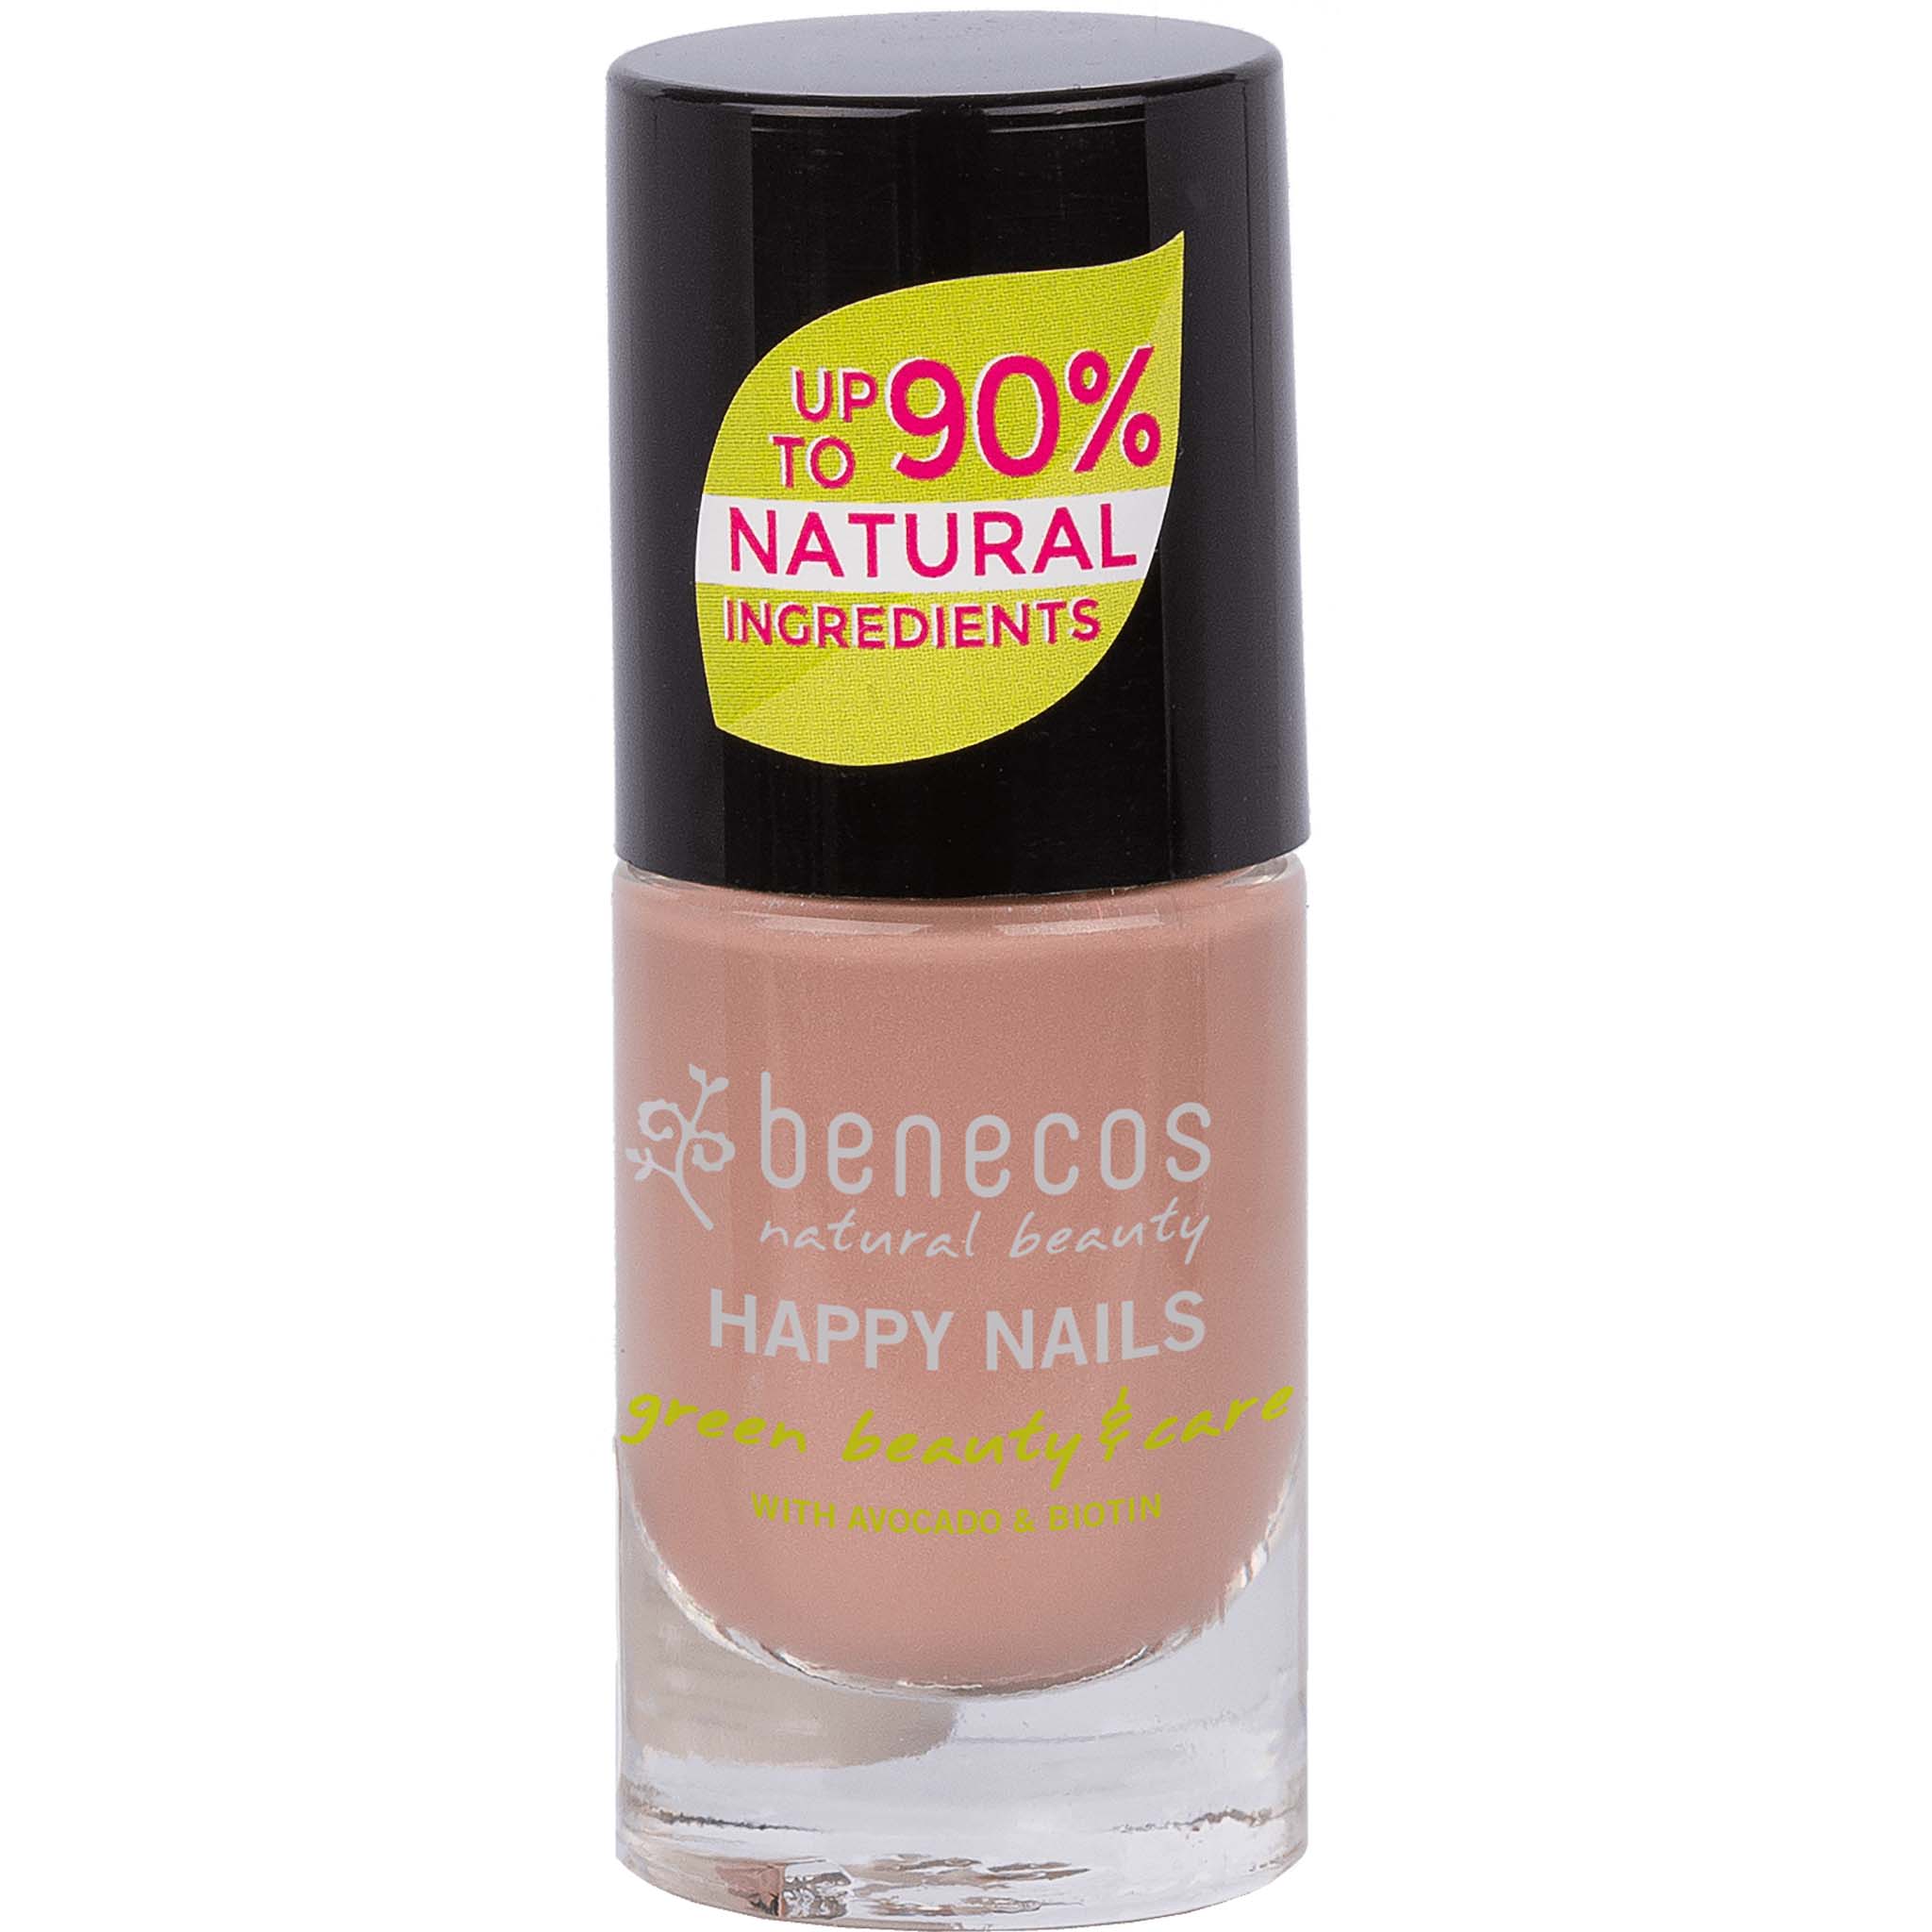 Natural Nail Polish - You-nique - UK DELIVERY ONLY - mypure.co.uk